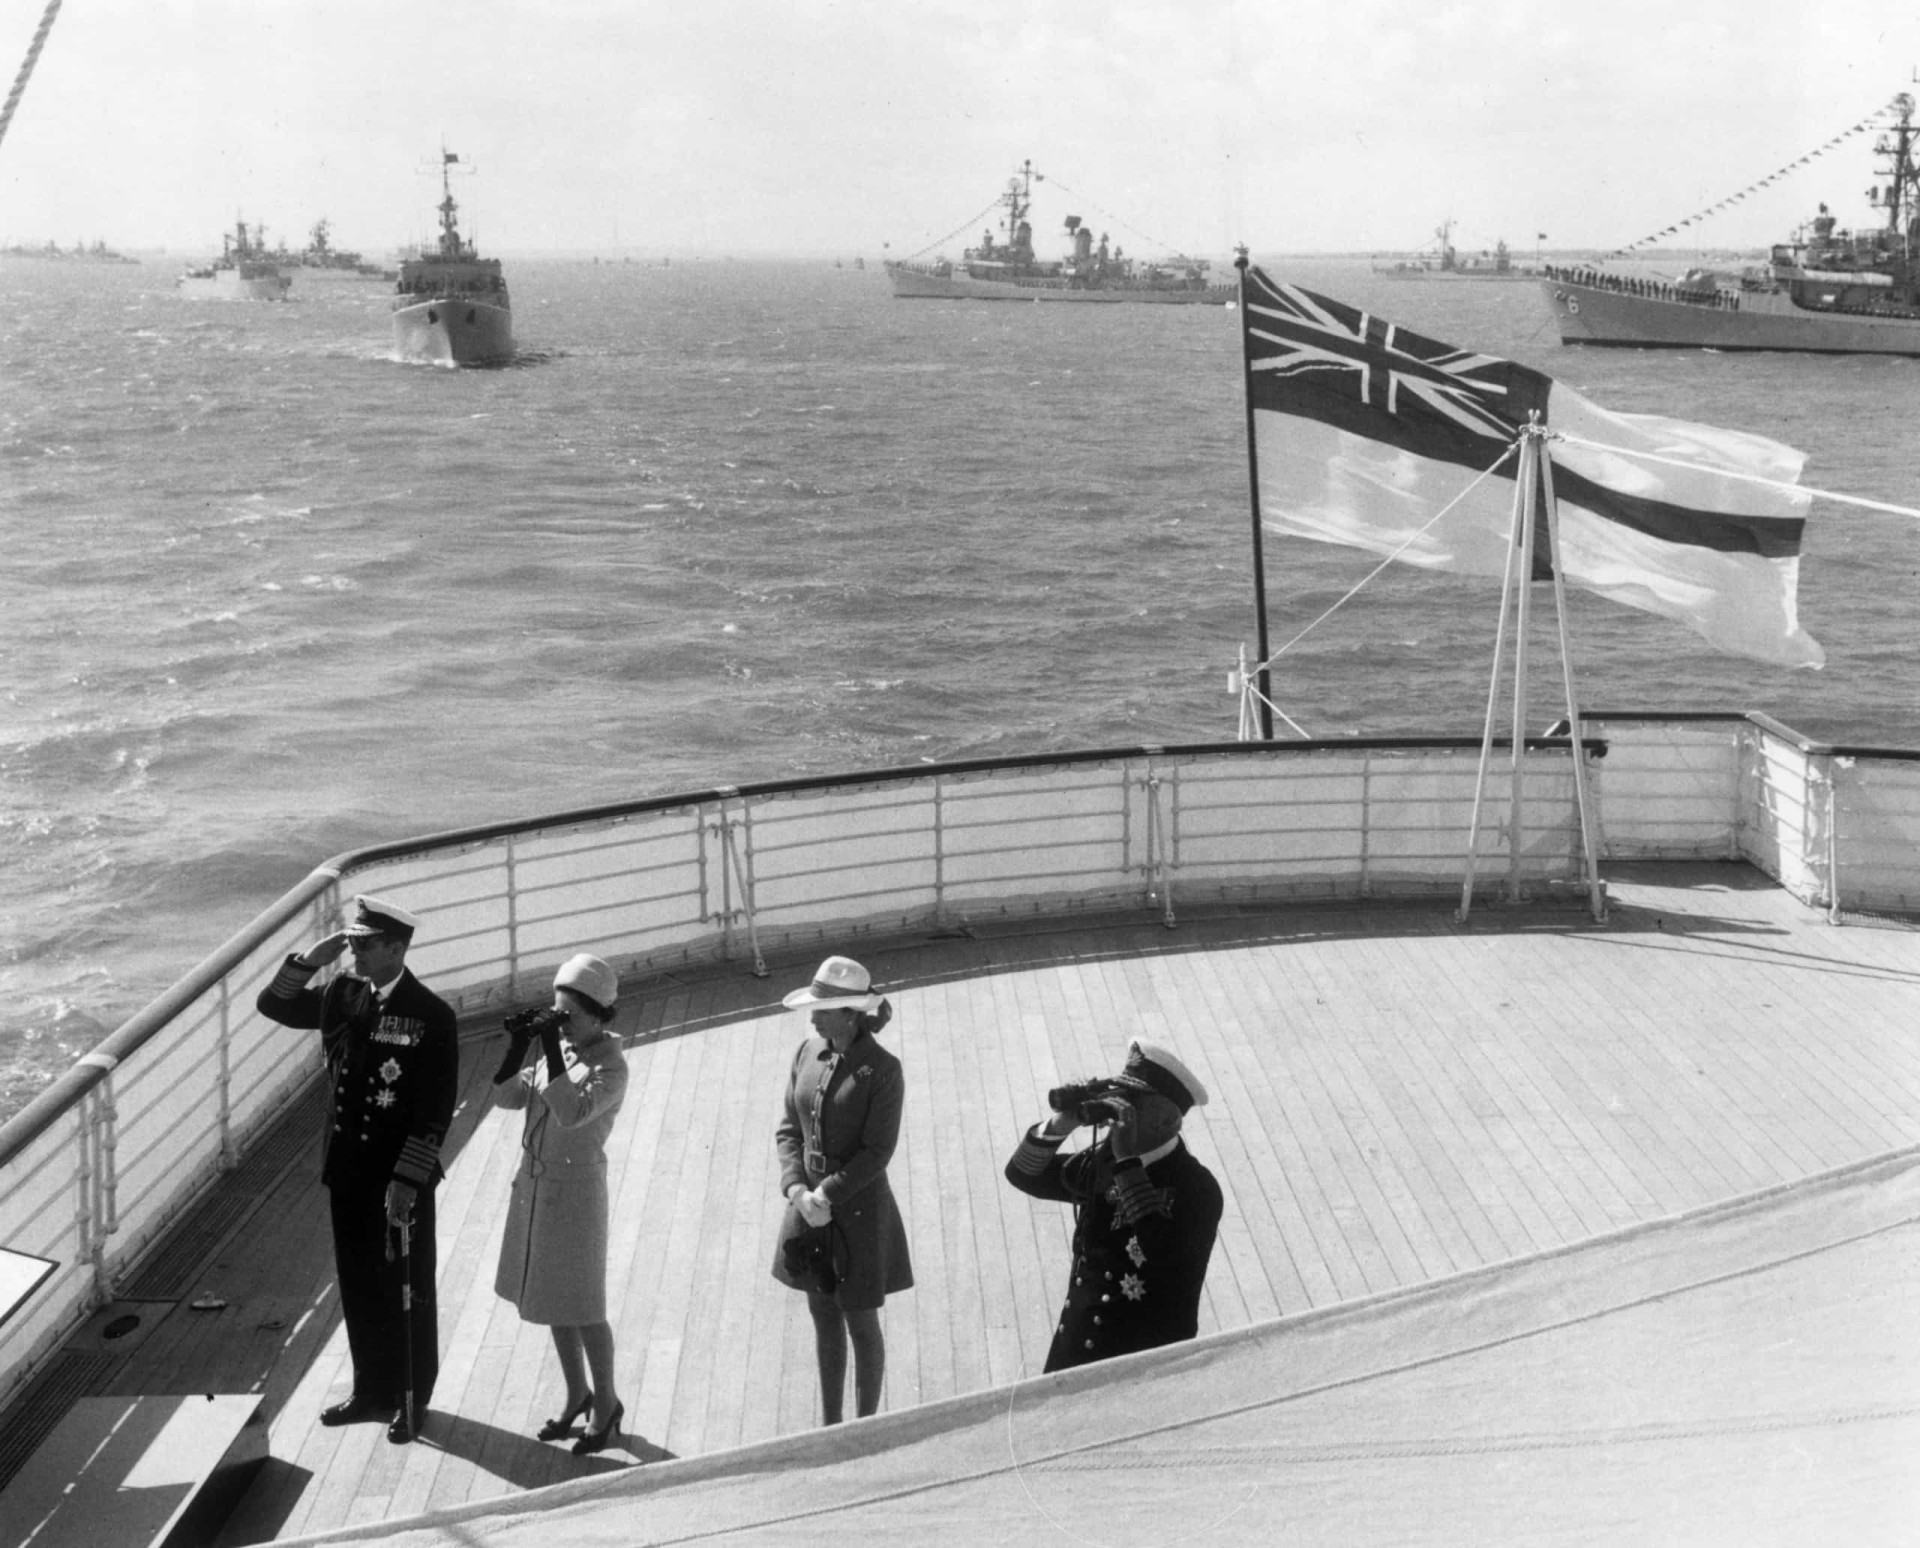 <p>Prince Philip, Queen Elizabeth II, Princess Anne, and Earl Mountbatten on board the Britannia at Spithead on the south coast of England during the Queen's review of the 62 ships of the North Atlantic Treaty Organization (NATO) fleet. This ceremony formed part of NATO's 20th-anniversary celebrations. </p><p><a href="https://www.msn.com/en-ph/community/channel/vid-7xx8mnucu55yw63we9va2gwr7uihbxwc68fxqp25x6tg4ftibpra?cvid=94631541bc0f4f89bfd59158d696ad7e">Follow us and access great exclusive content every day</a></p>